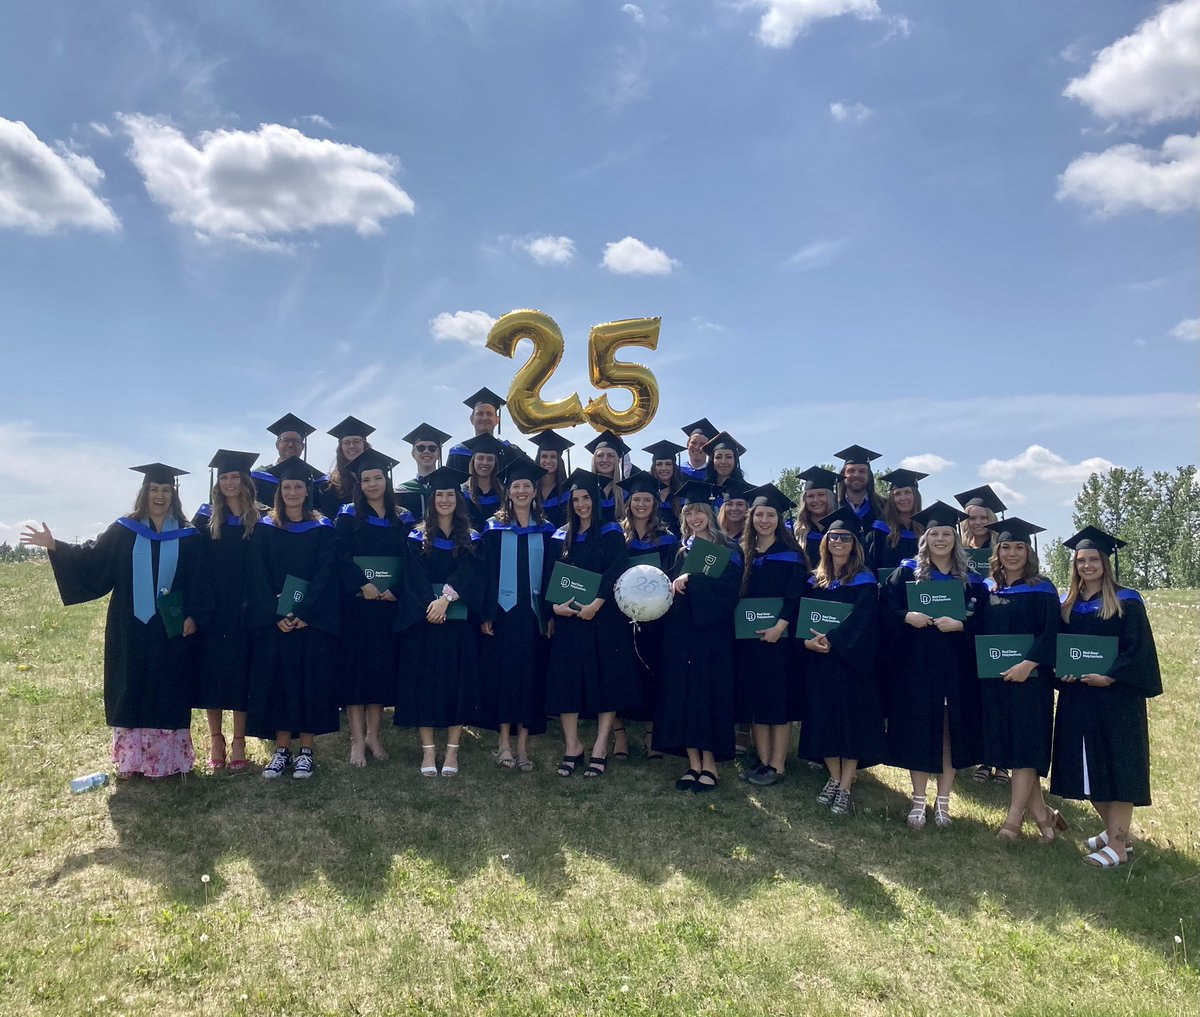 Congratulations to the 25th Graduating Class of the @UAlbertaEd Bachelor of Education Collaborative Degree in “Middle Years” offered at @RedDeerPolytech We are very proud of you and wish you well in your future endeavours 💕 @RDPEducation @rdnewsNOW